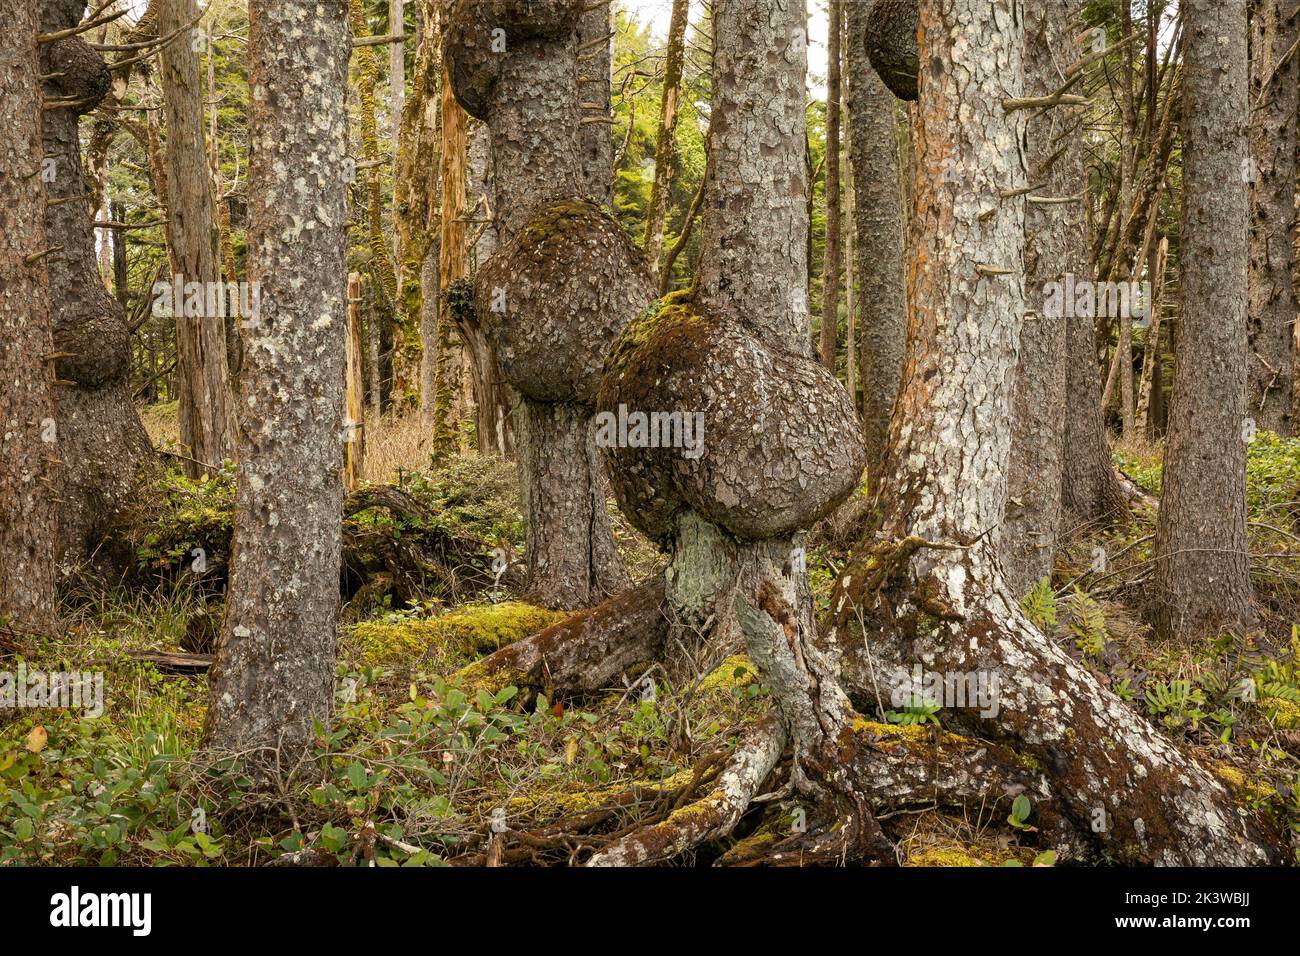 WA22085-00...WASHINGTON - Large burls on a spruce trees growing along the edge of the coast in Olympic National Park. Stock Photo